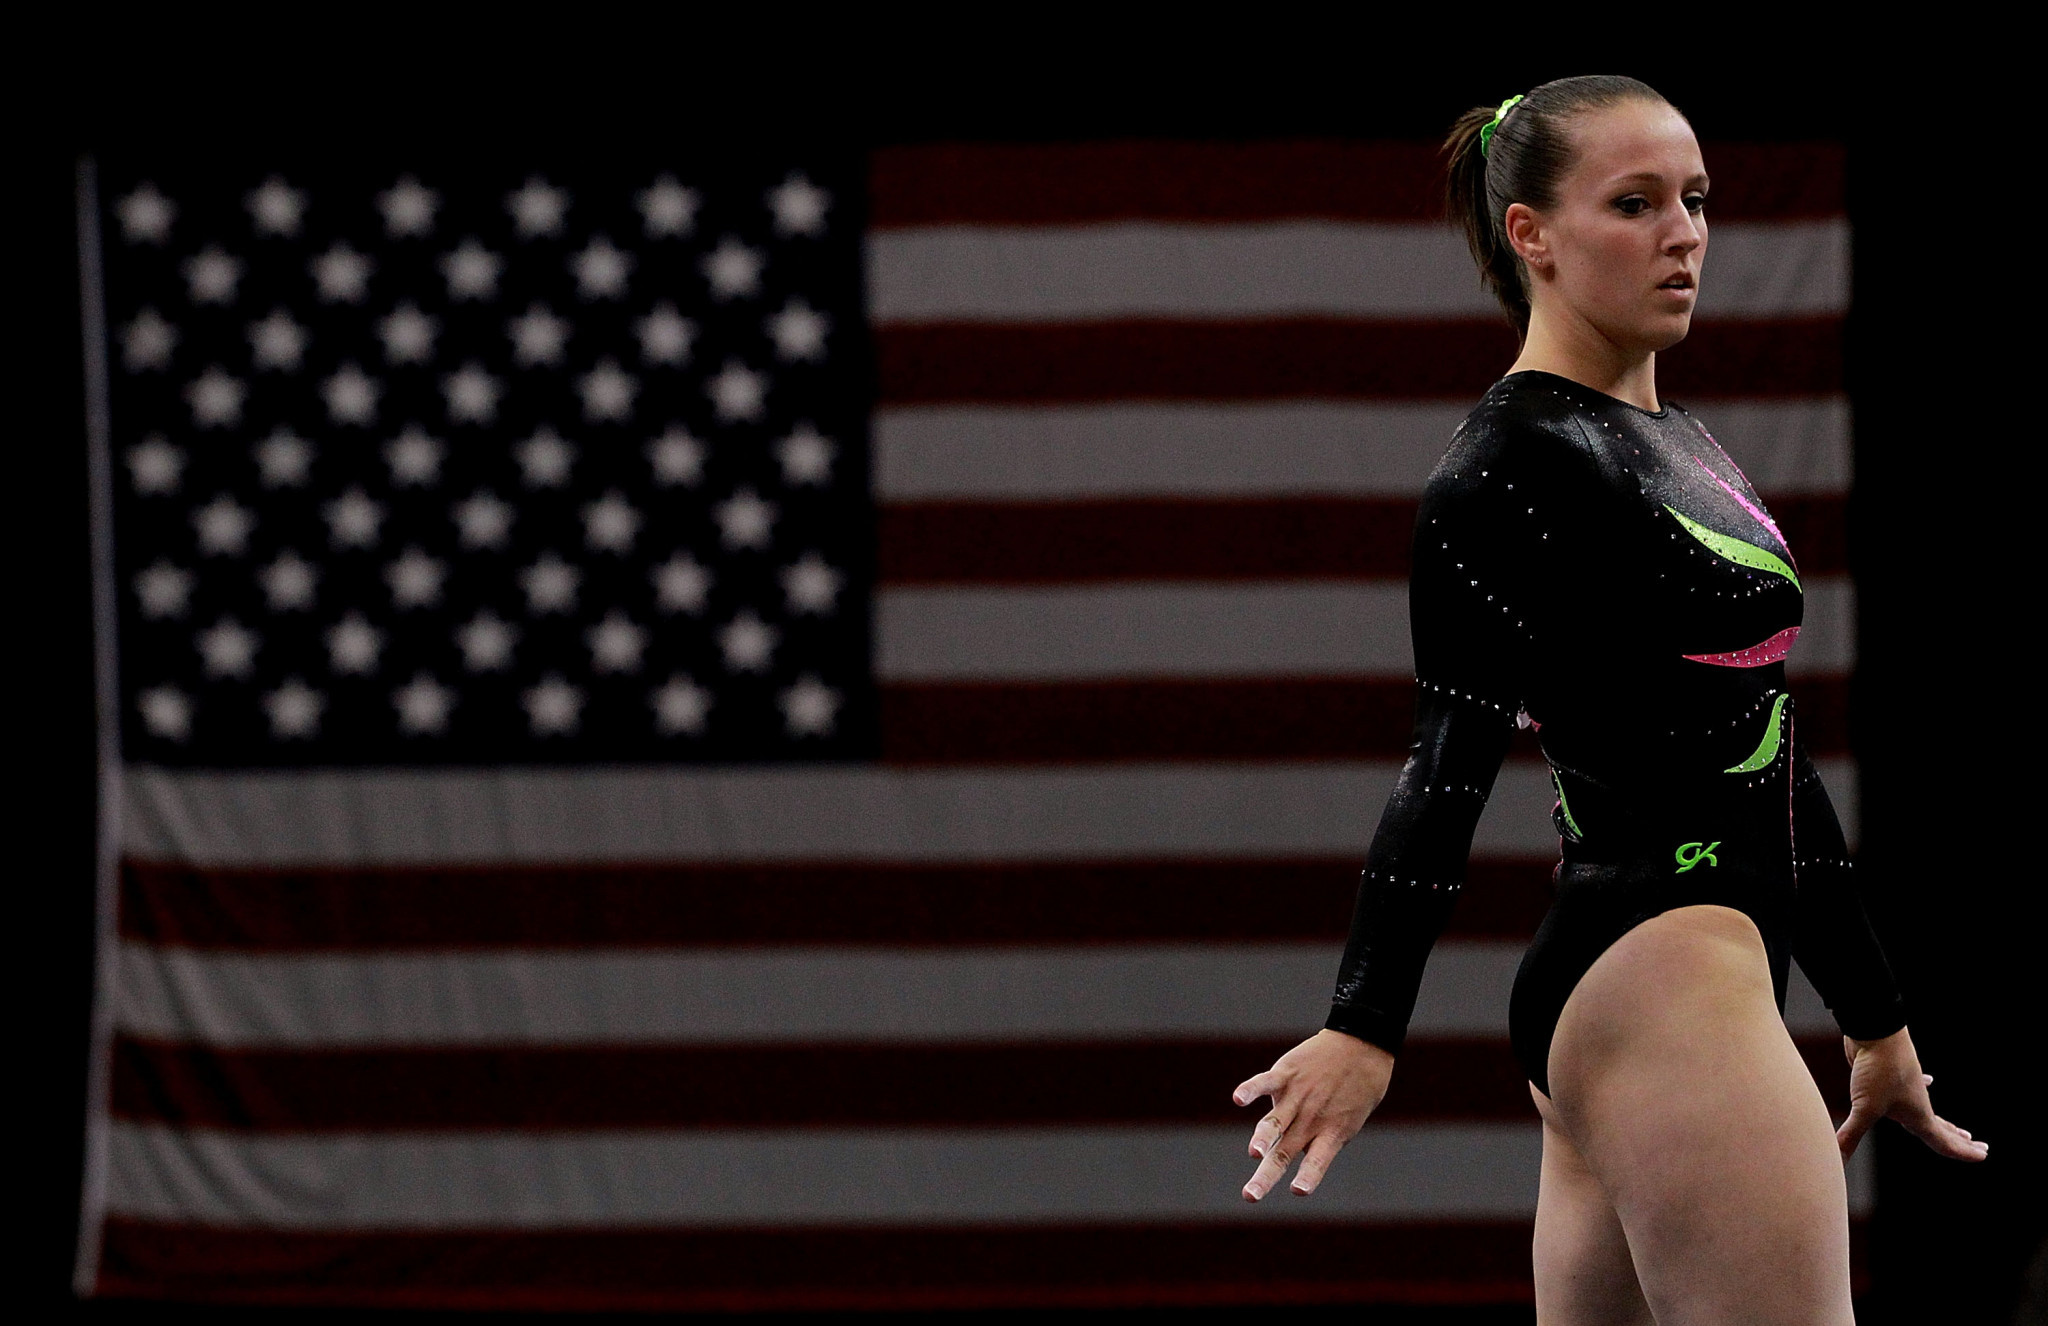 American gymnast Memmel could compete at Tokyo 2020 after announcing return to sport